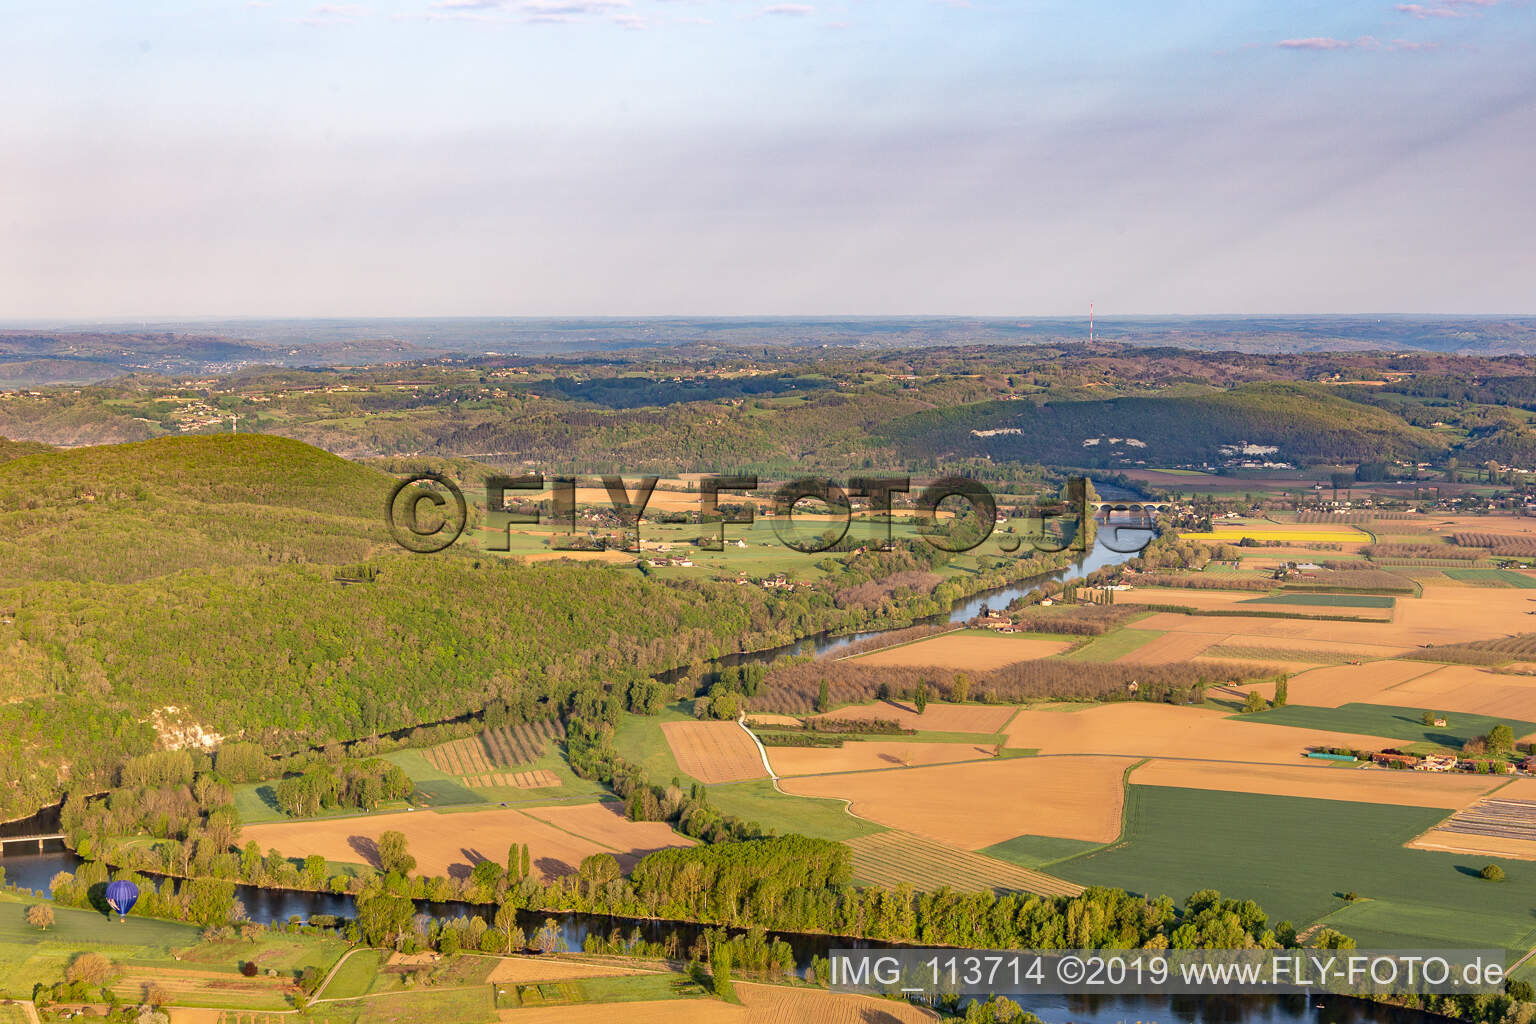 Saint-Vincent-de-Cosse in the state Dordogne, France from above